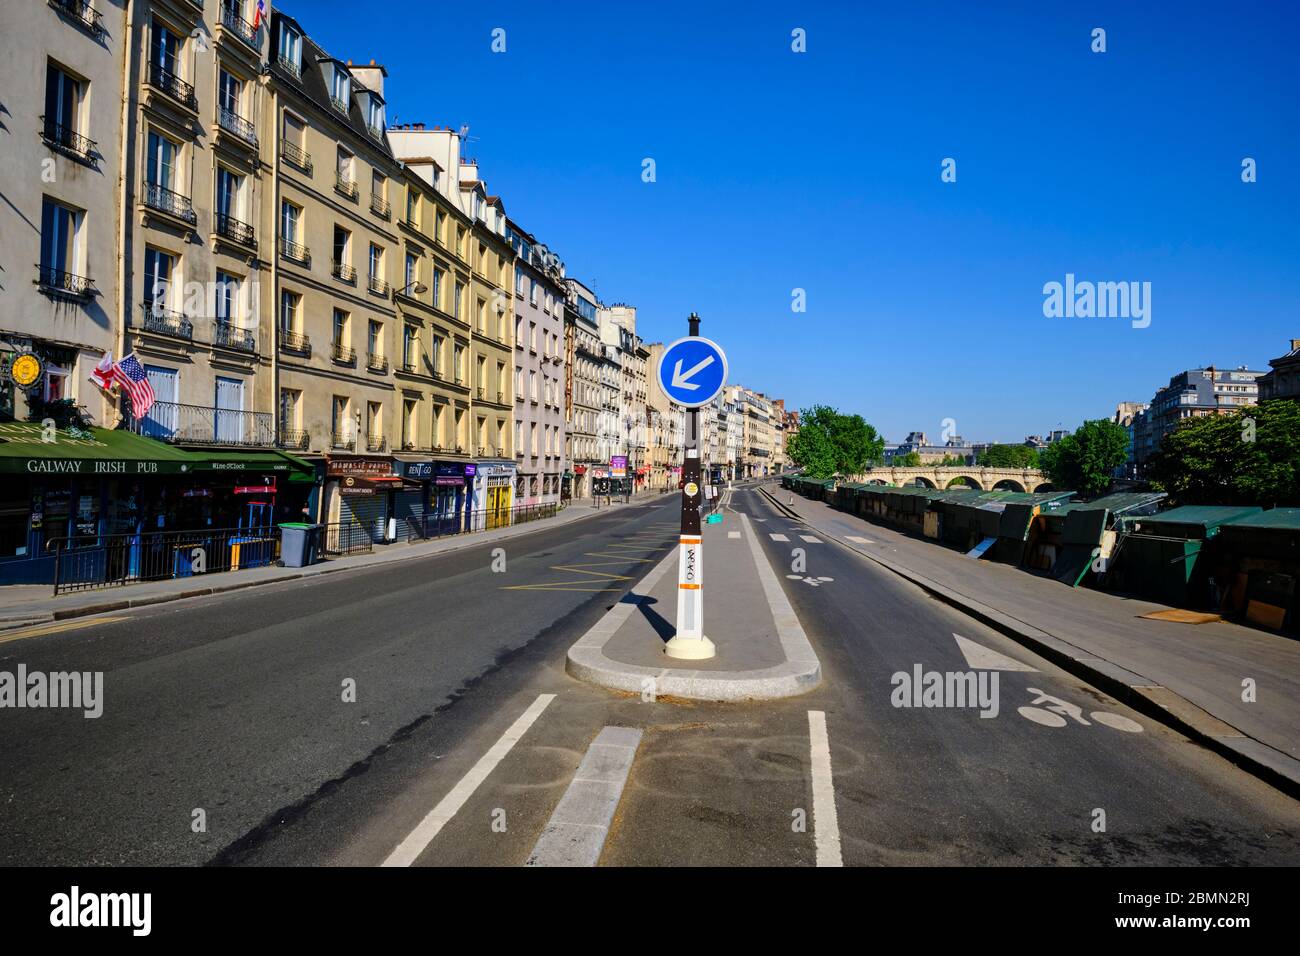 France, Paris, the quai des Grands Augustins during the lockdown of Covid 19 Stock Photo